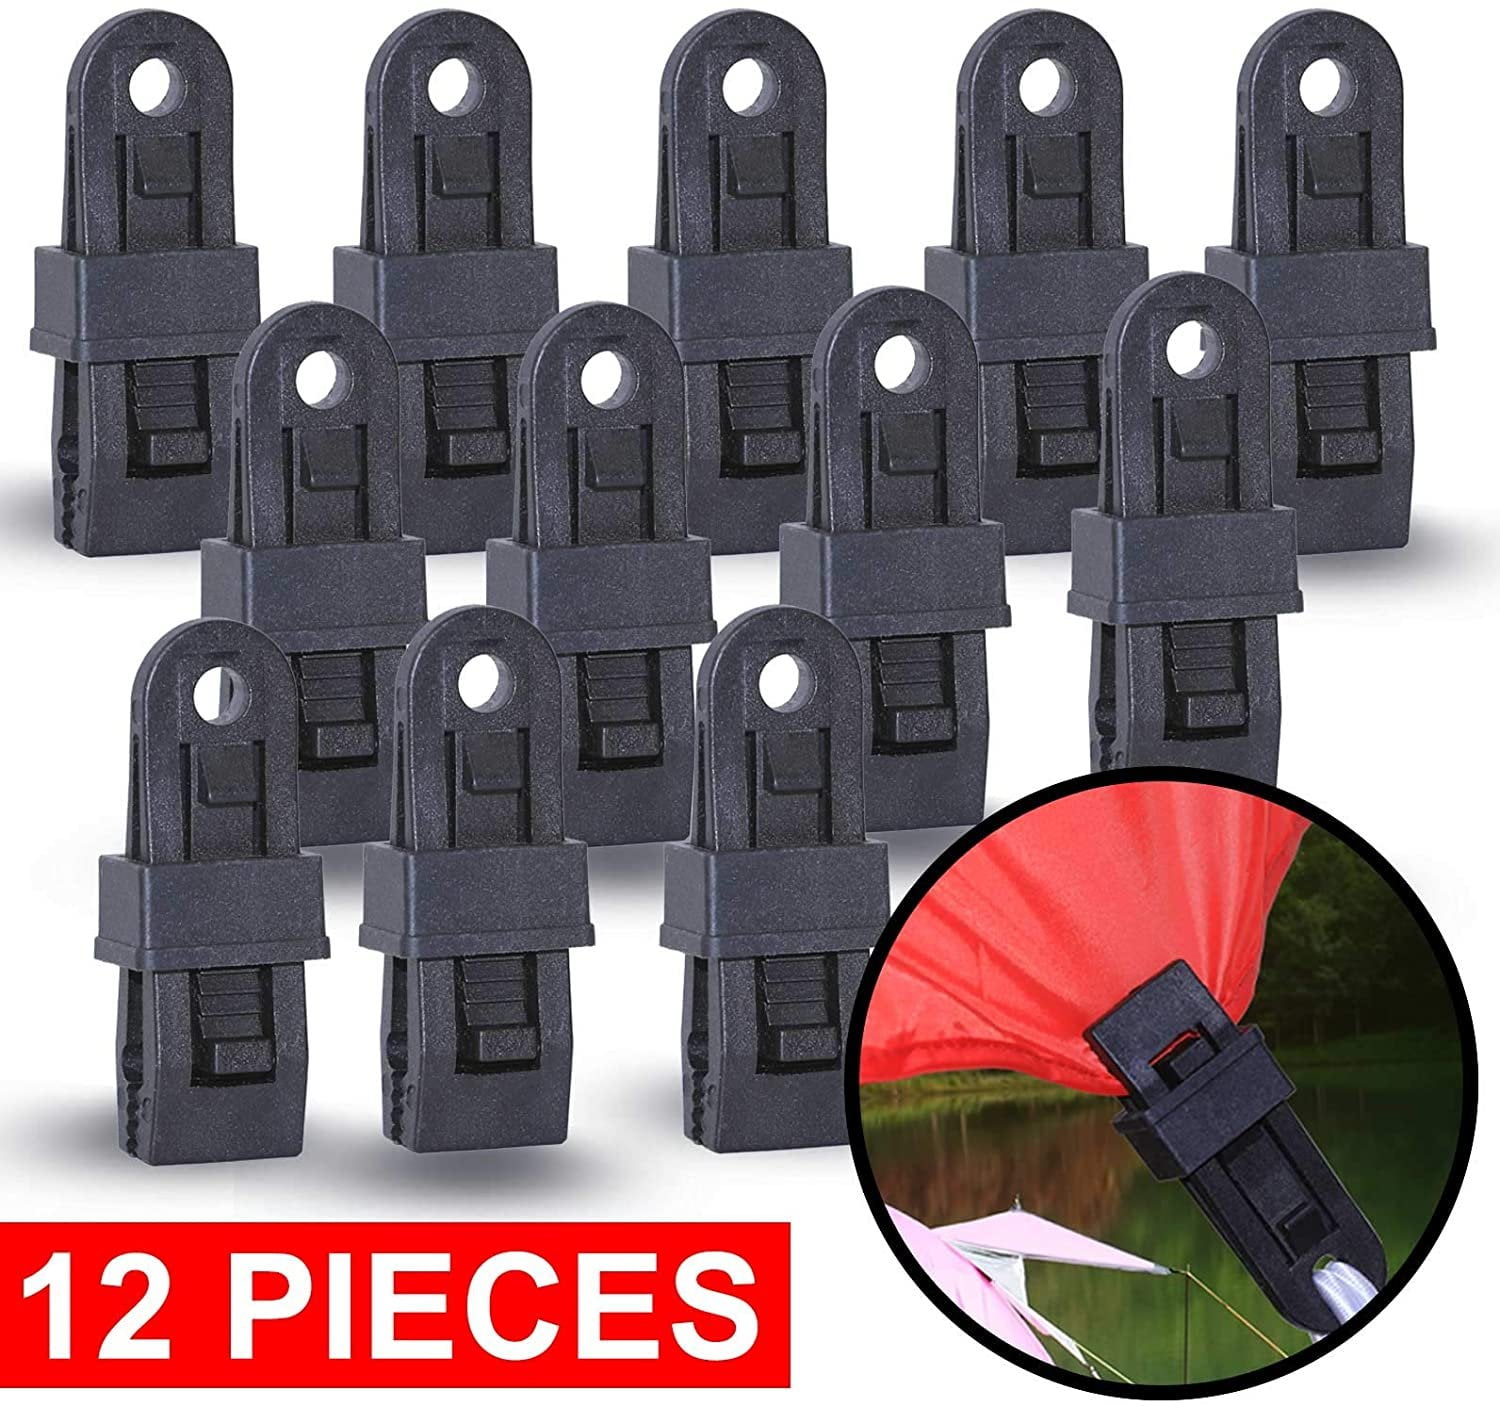 Tarp Clamp Clips Heavy Duty Lock Grip,40-Pack Awning Clamp for Camping Farming Tarps Canopy Car Swimming Pool Covers Boat Projector Screen Tent Snaps Tarps Canopies and Covers Locking Thumb Screw Clip 